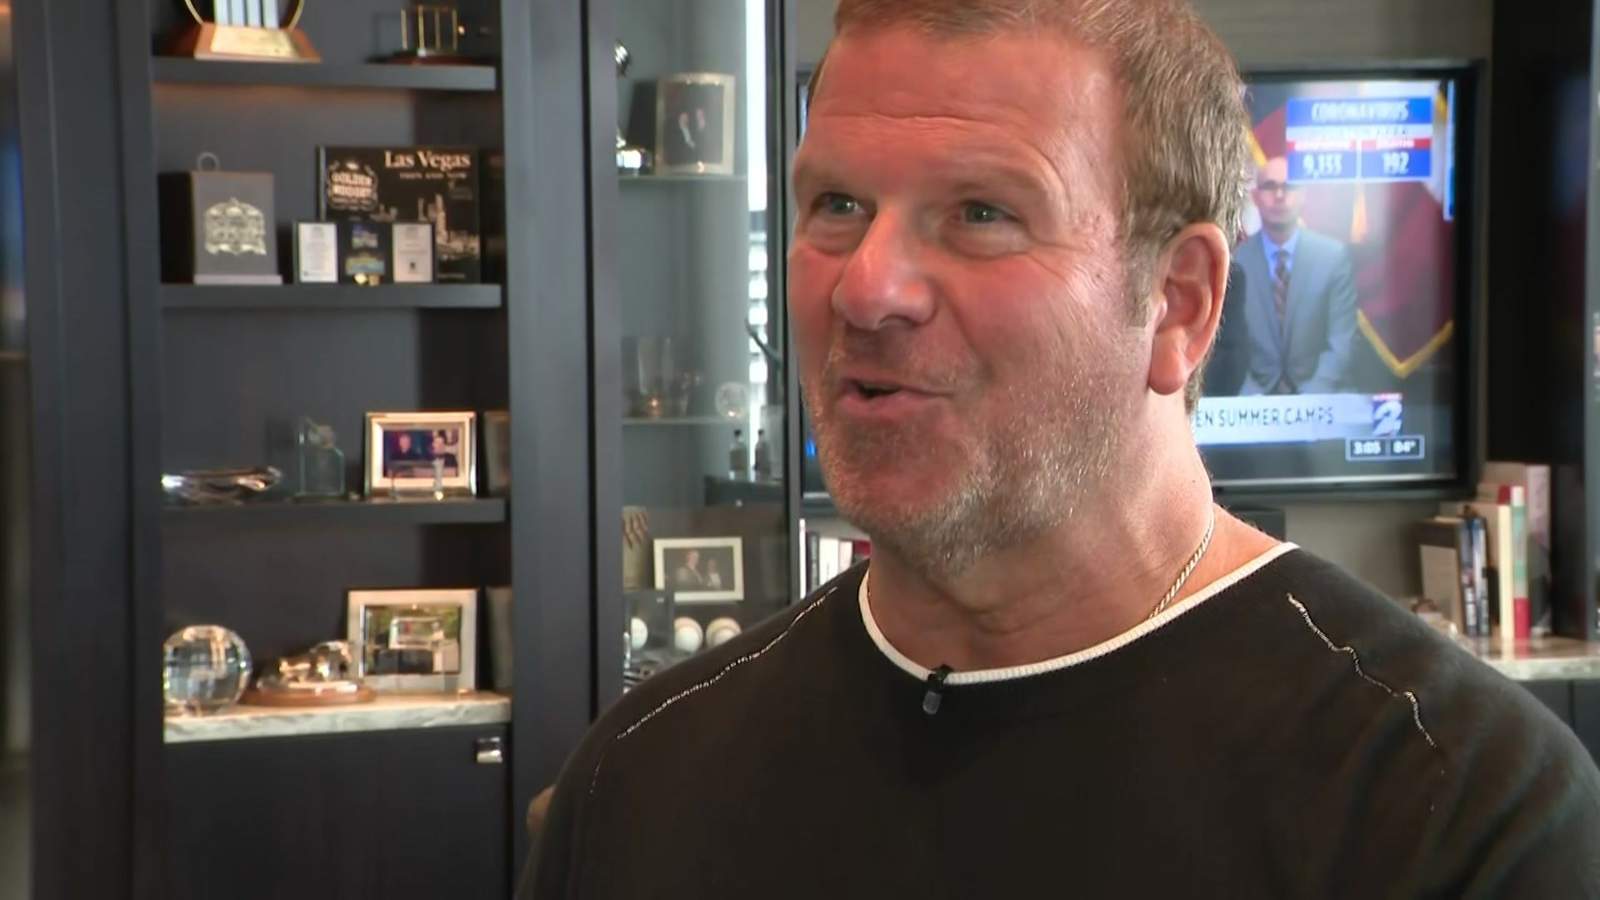 'Wise decision’: Billionaire Tilman Fertitta says reopening Texas will put employees back to work